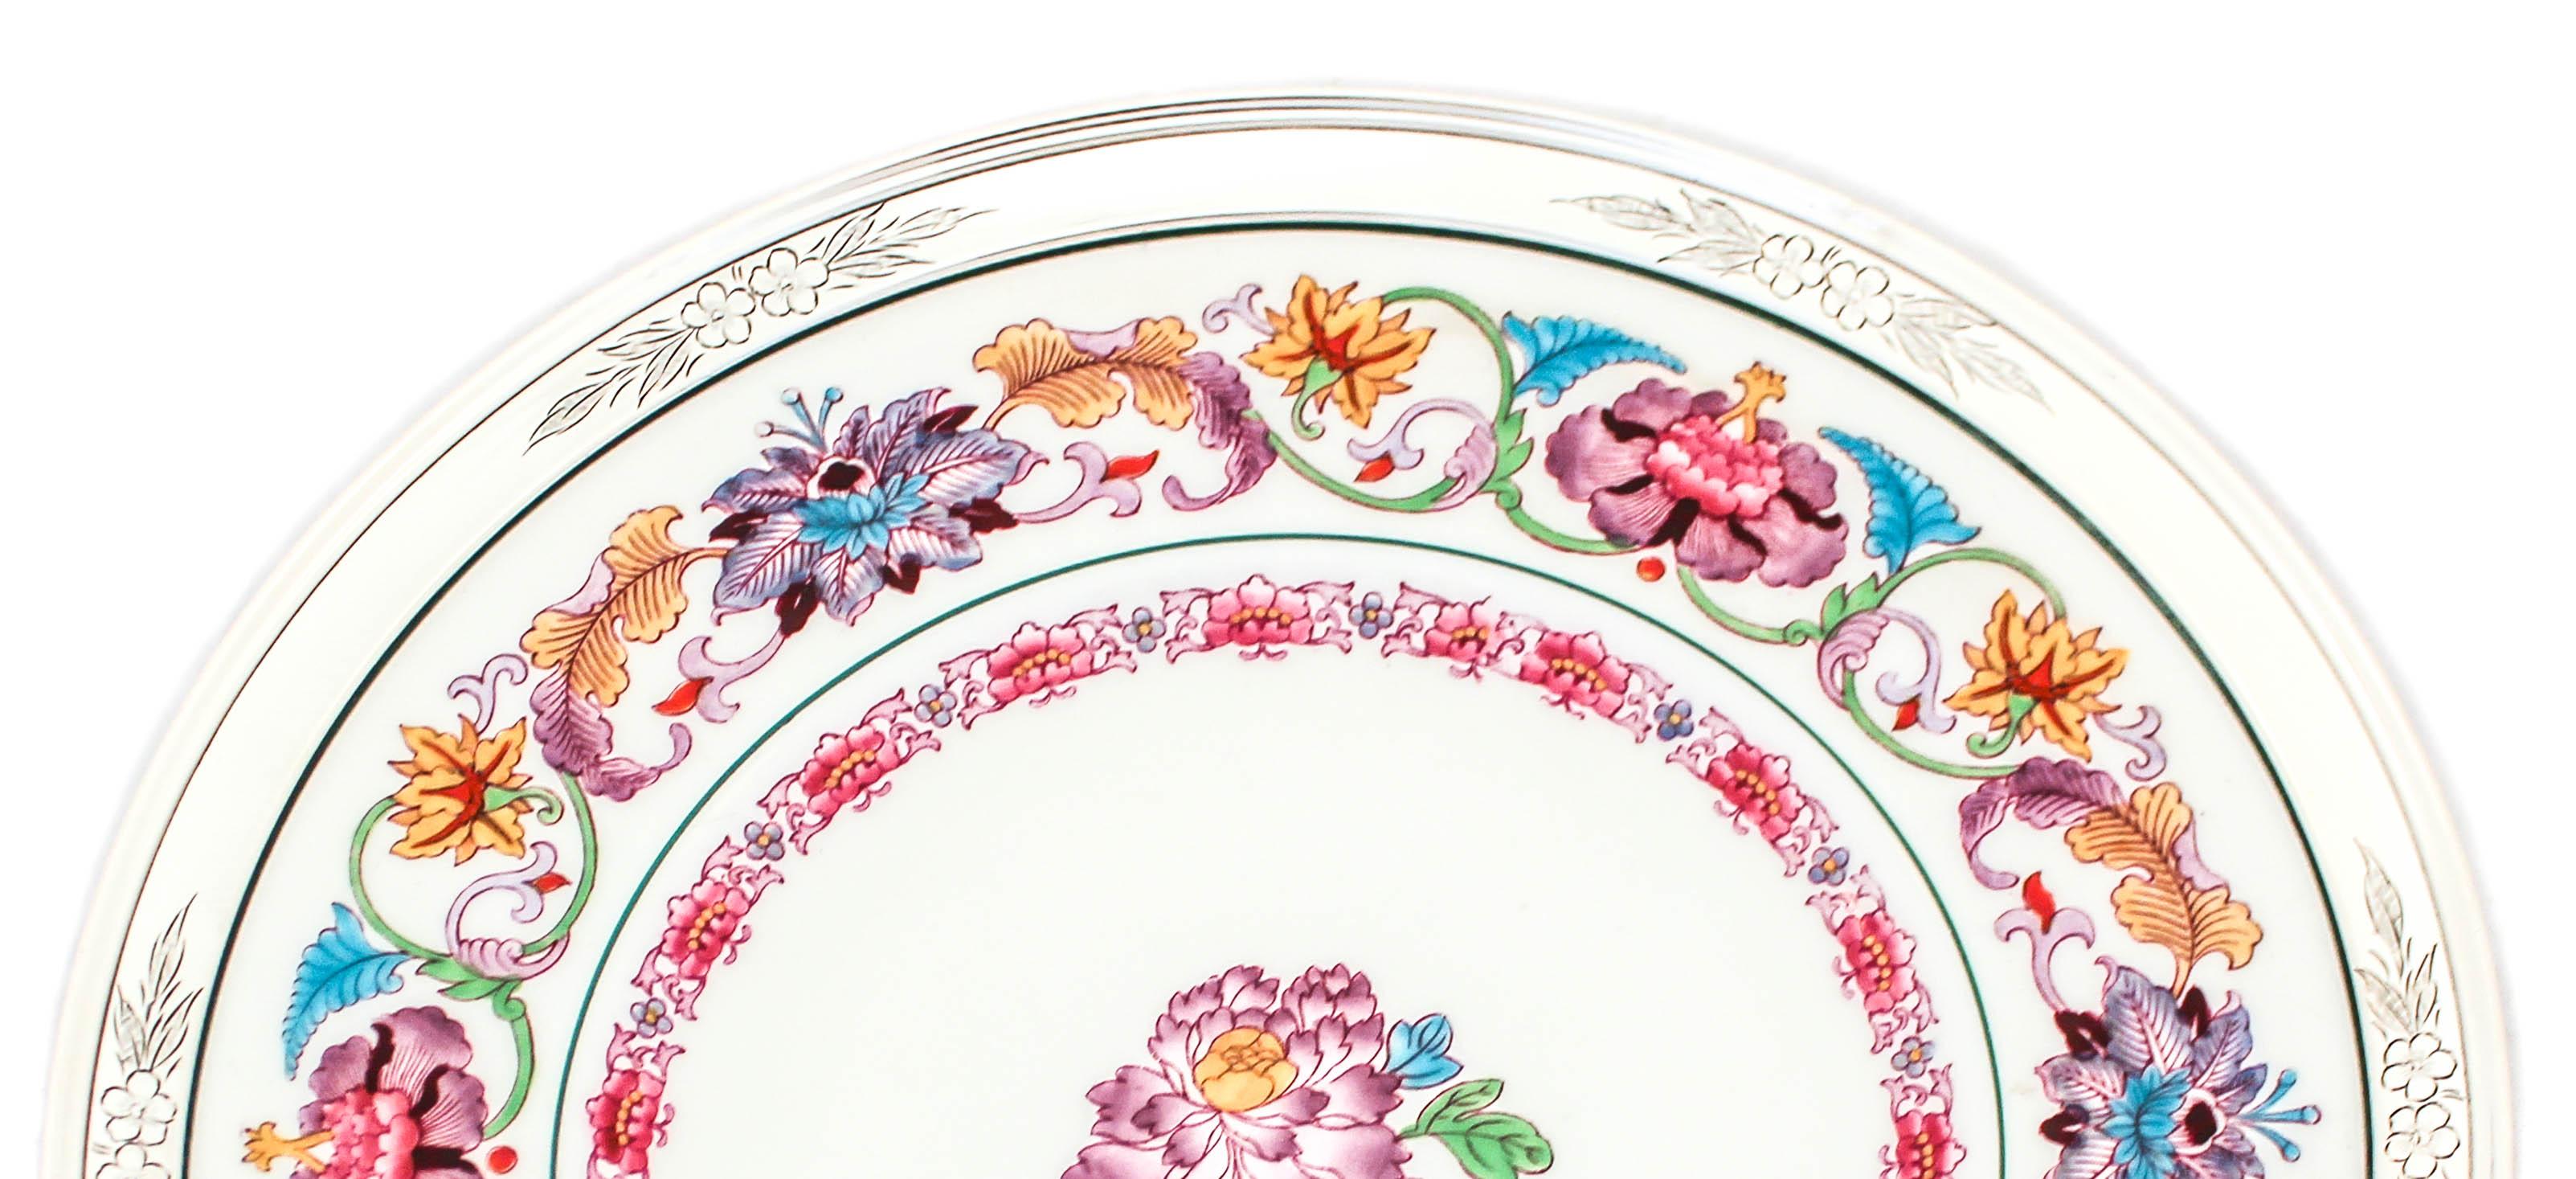 This sterling silver and porcelain platter is made by the world famous Wedgwood Company of England. Hand painted with vibrant colors; turquoise, mustard, plum, green, and different shades of red. Incased in a sterling silver rim etched with flowers